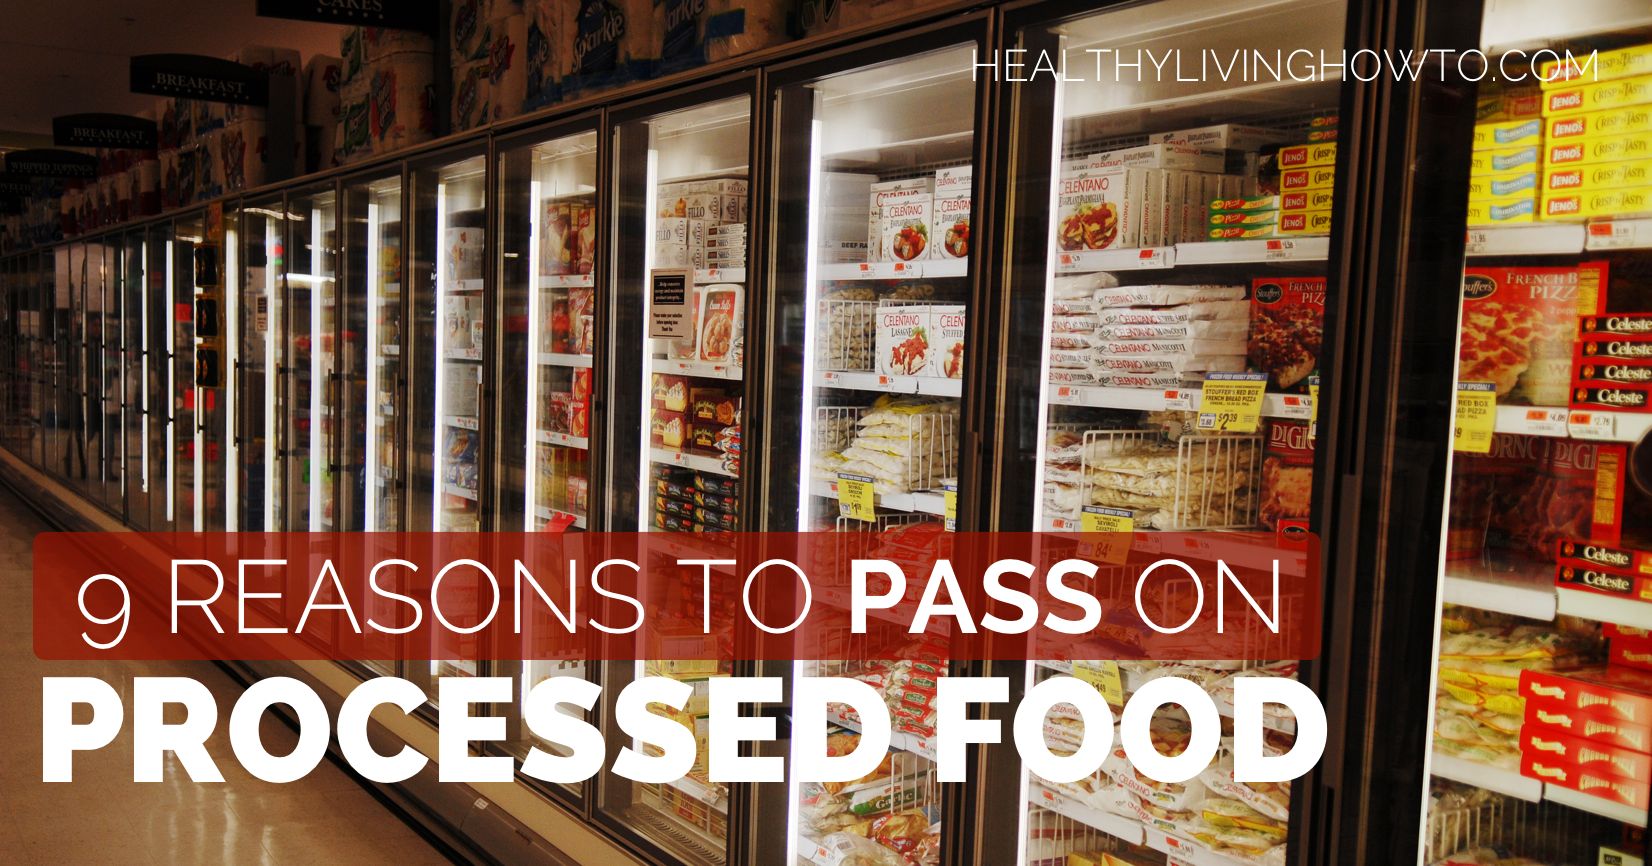 9 Reasons To Pass On Processed Food | healthylivinghowto.com